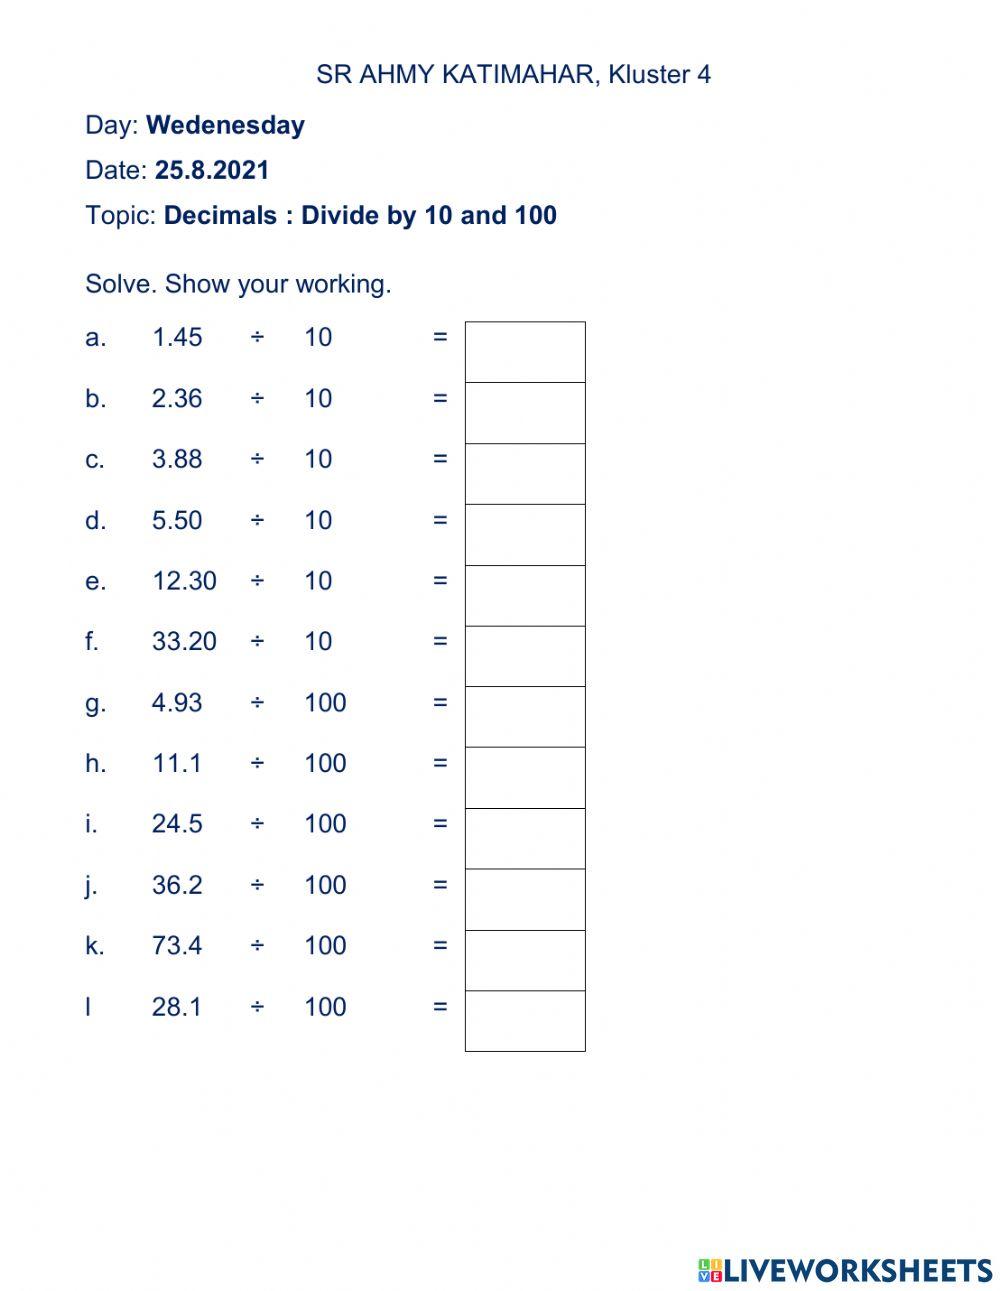 Decimals: divide by 10 and 100